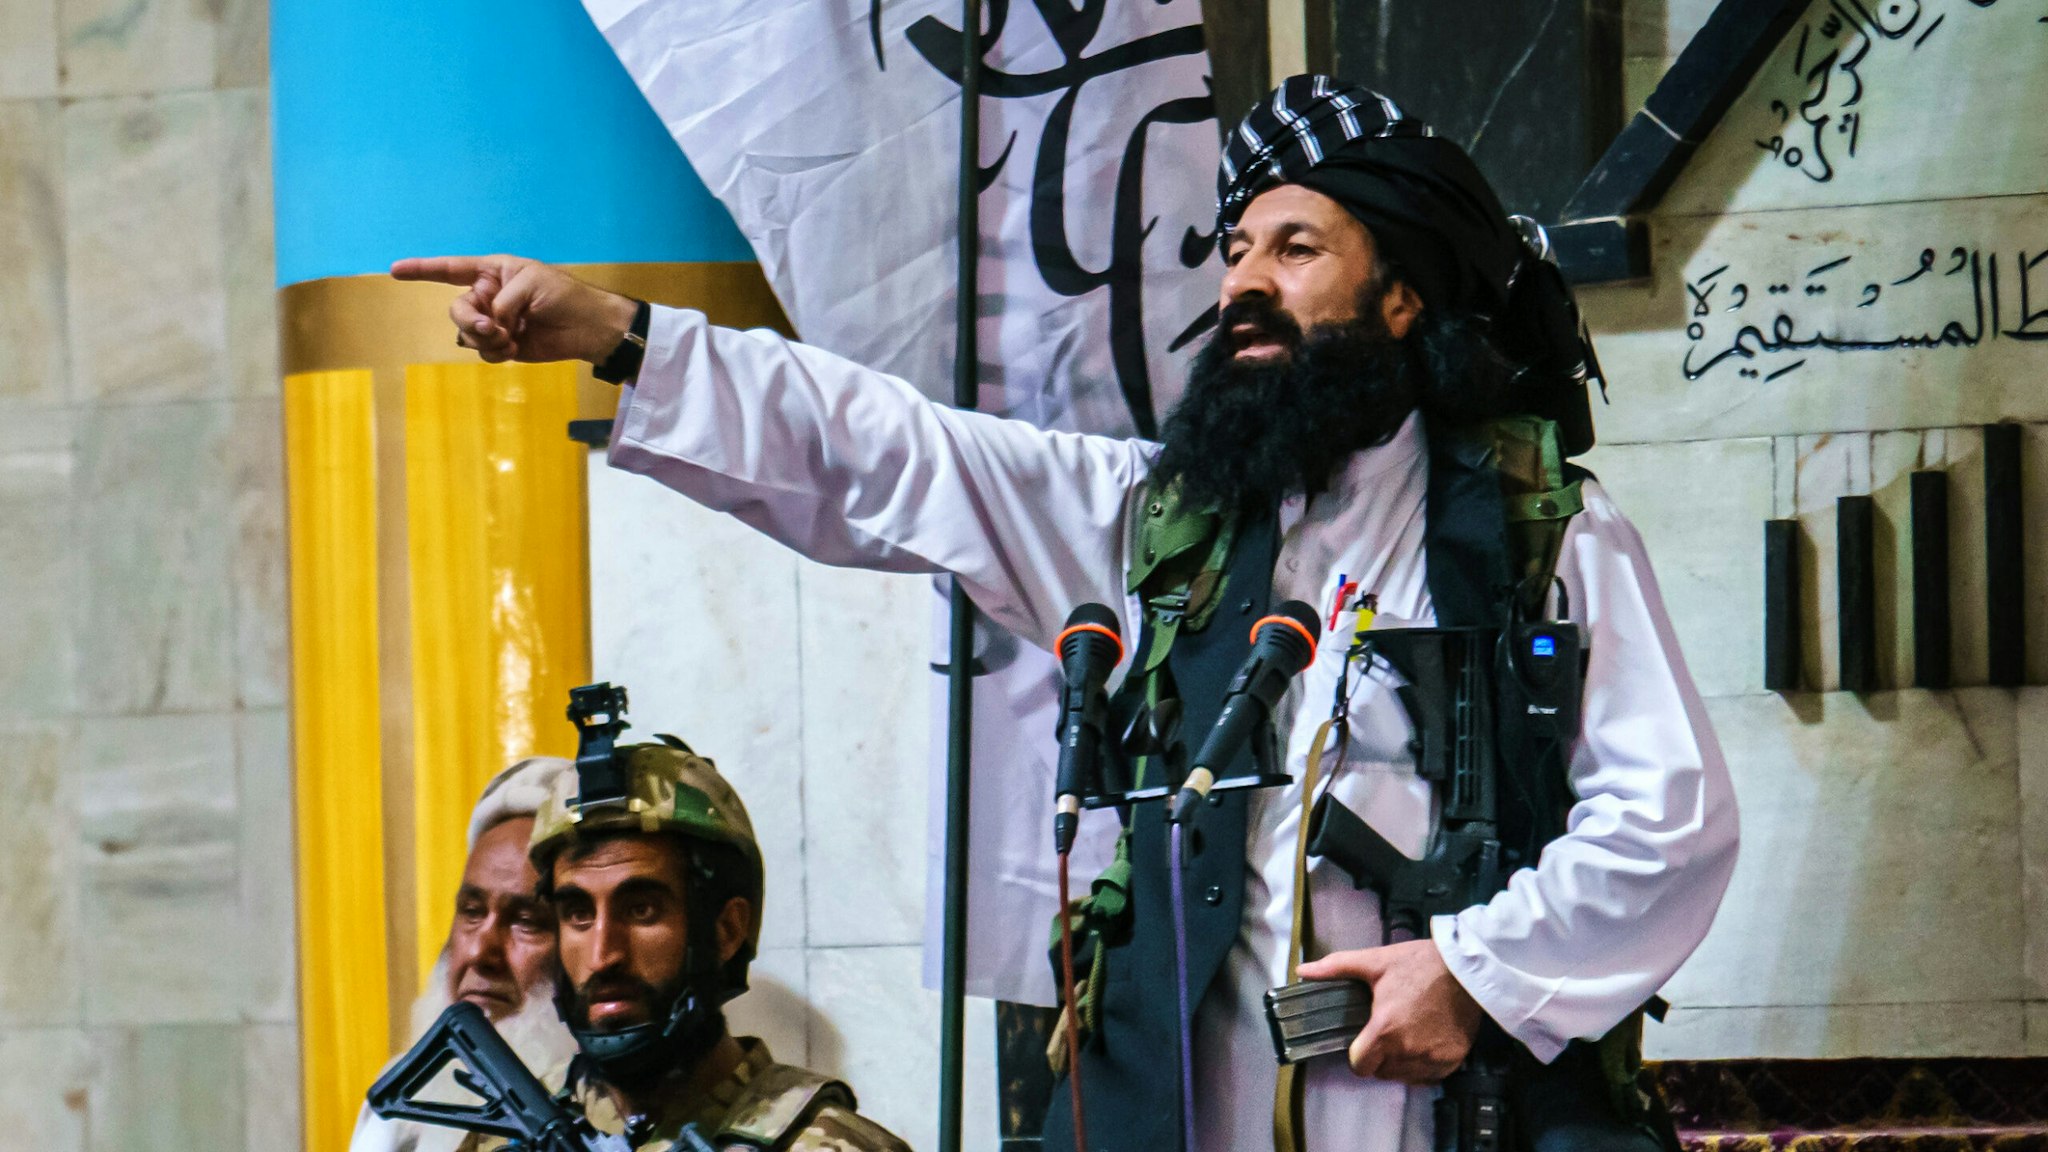 KABUL, AFGHANISTAN -- AUGUST 20, 2021: Khalil al-Rahman Haqqani, a leader of the Taliban affiliated Haqqani network, and a U.S.-designated terrorist with a five million dollar bounty, deliver his sermon to a large congregation at the Pul-I-Khishti Mosque in Kabul, Afghanistan, Friday, Aug. 20, 2021.